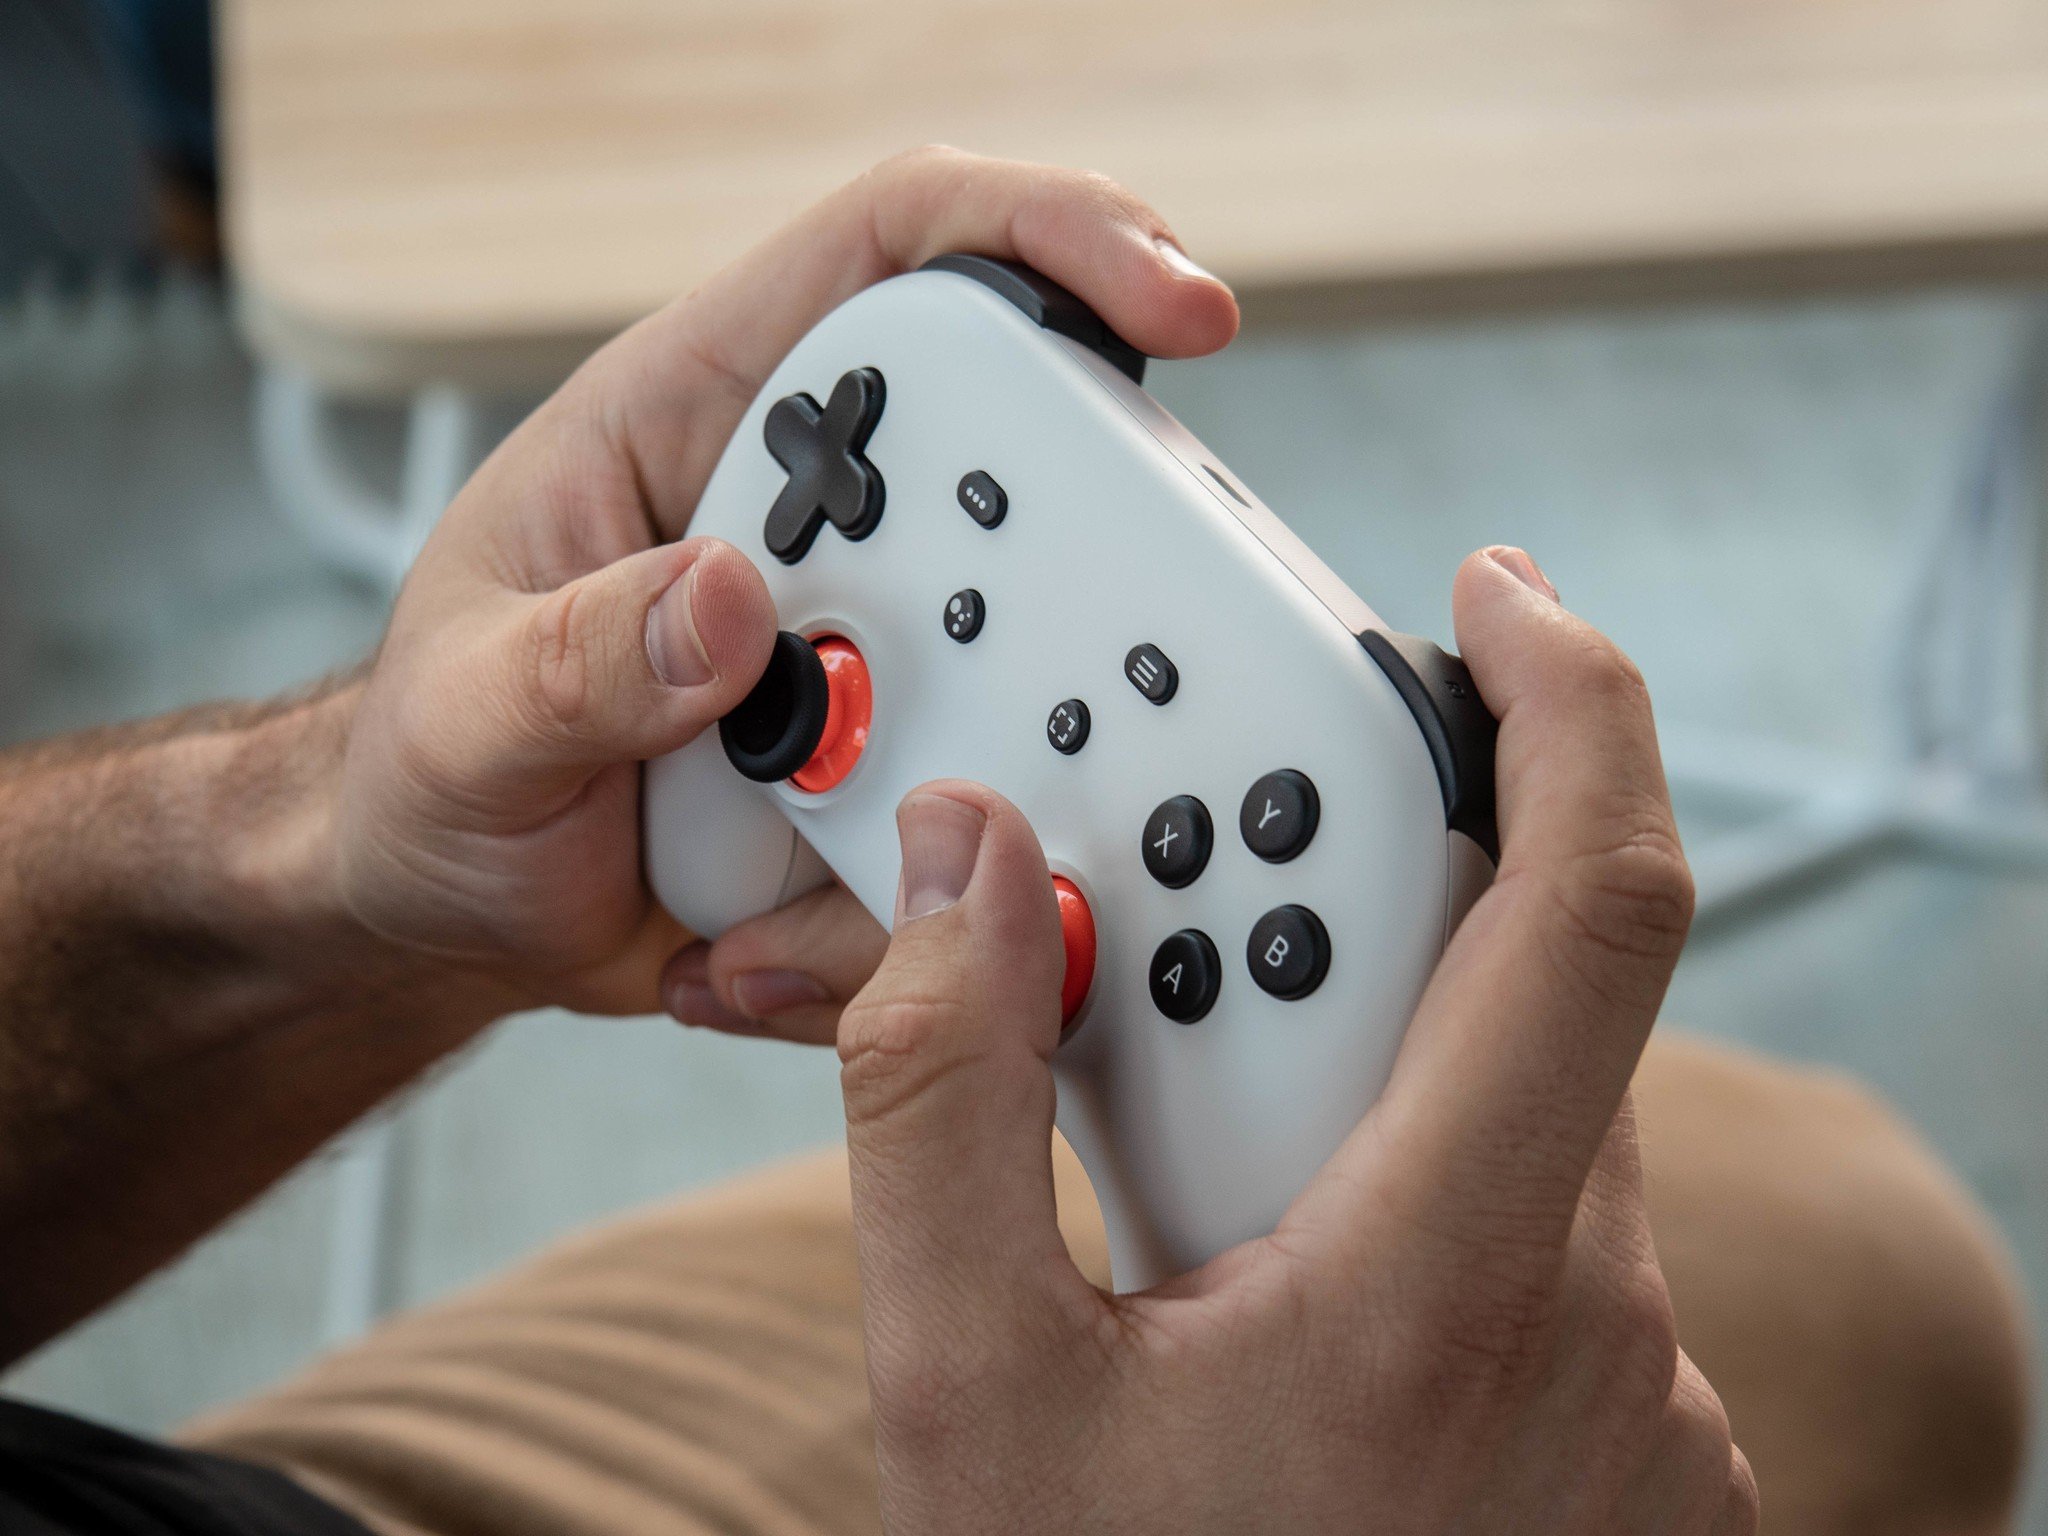 All games on Google Stadia are now at your fingertips